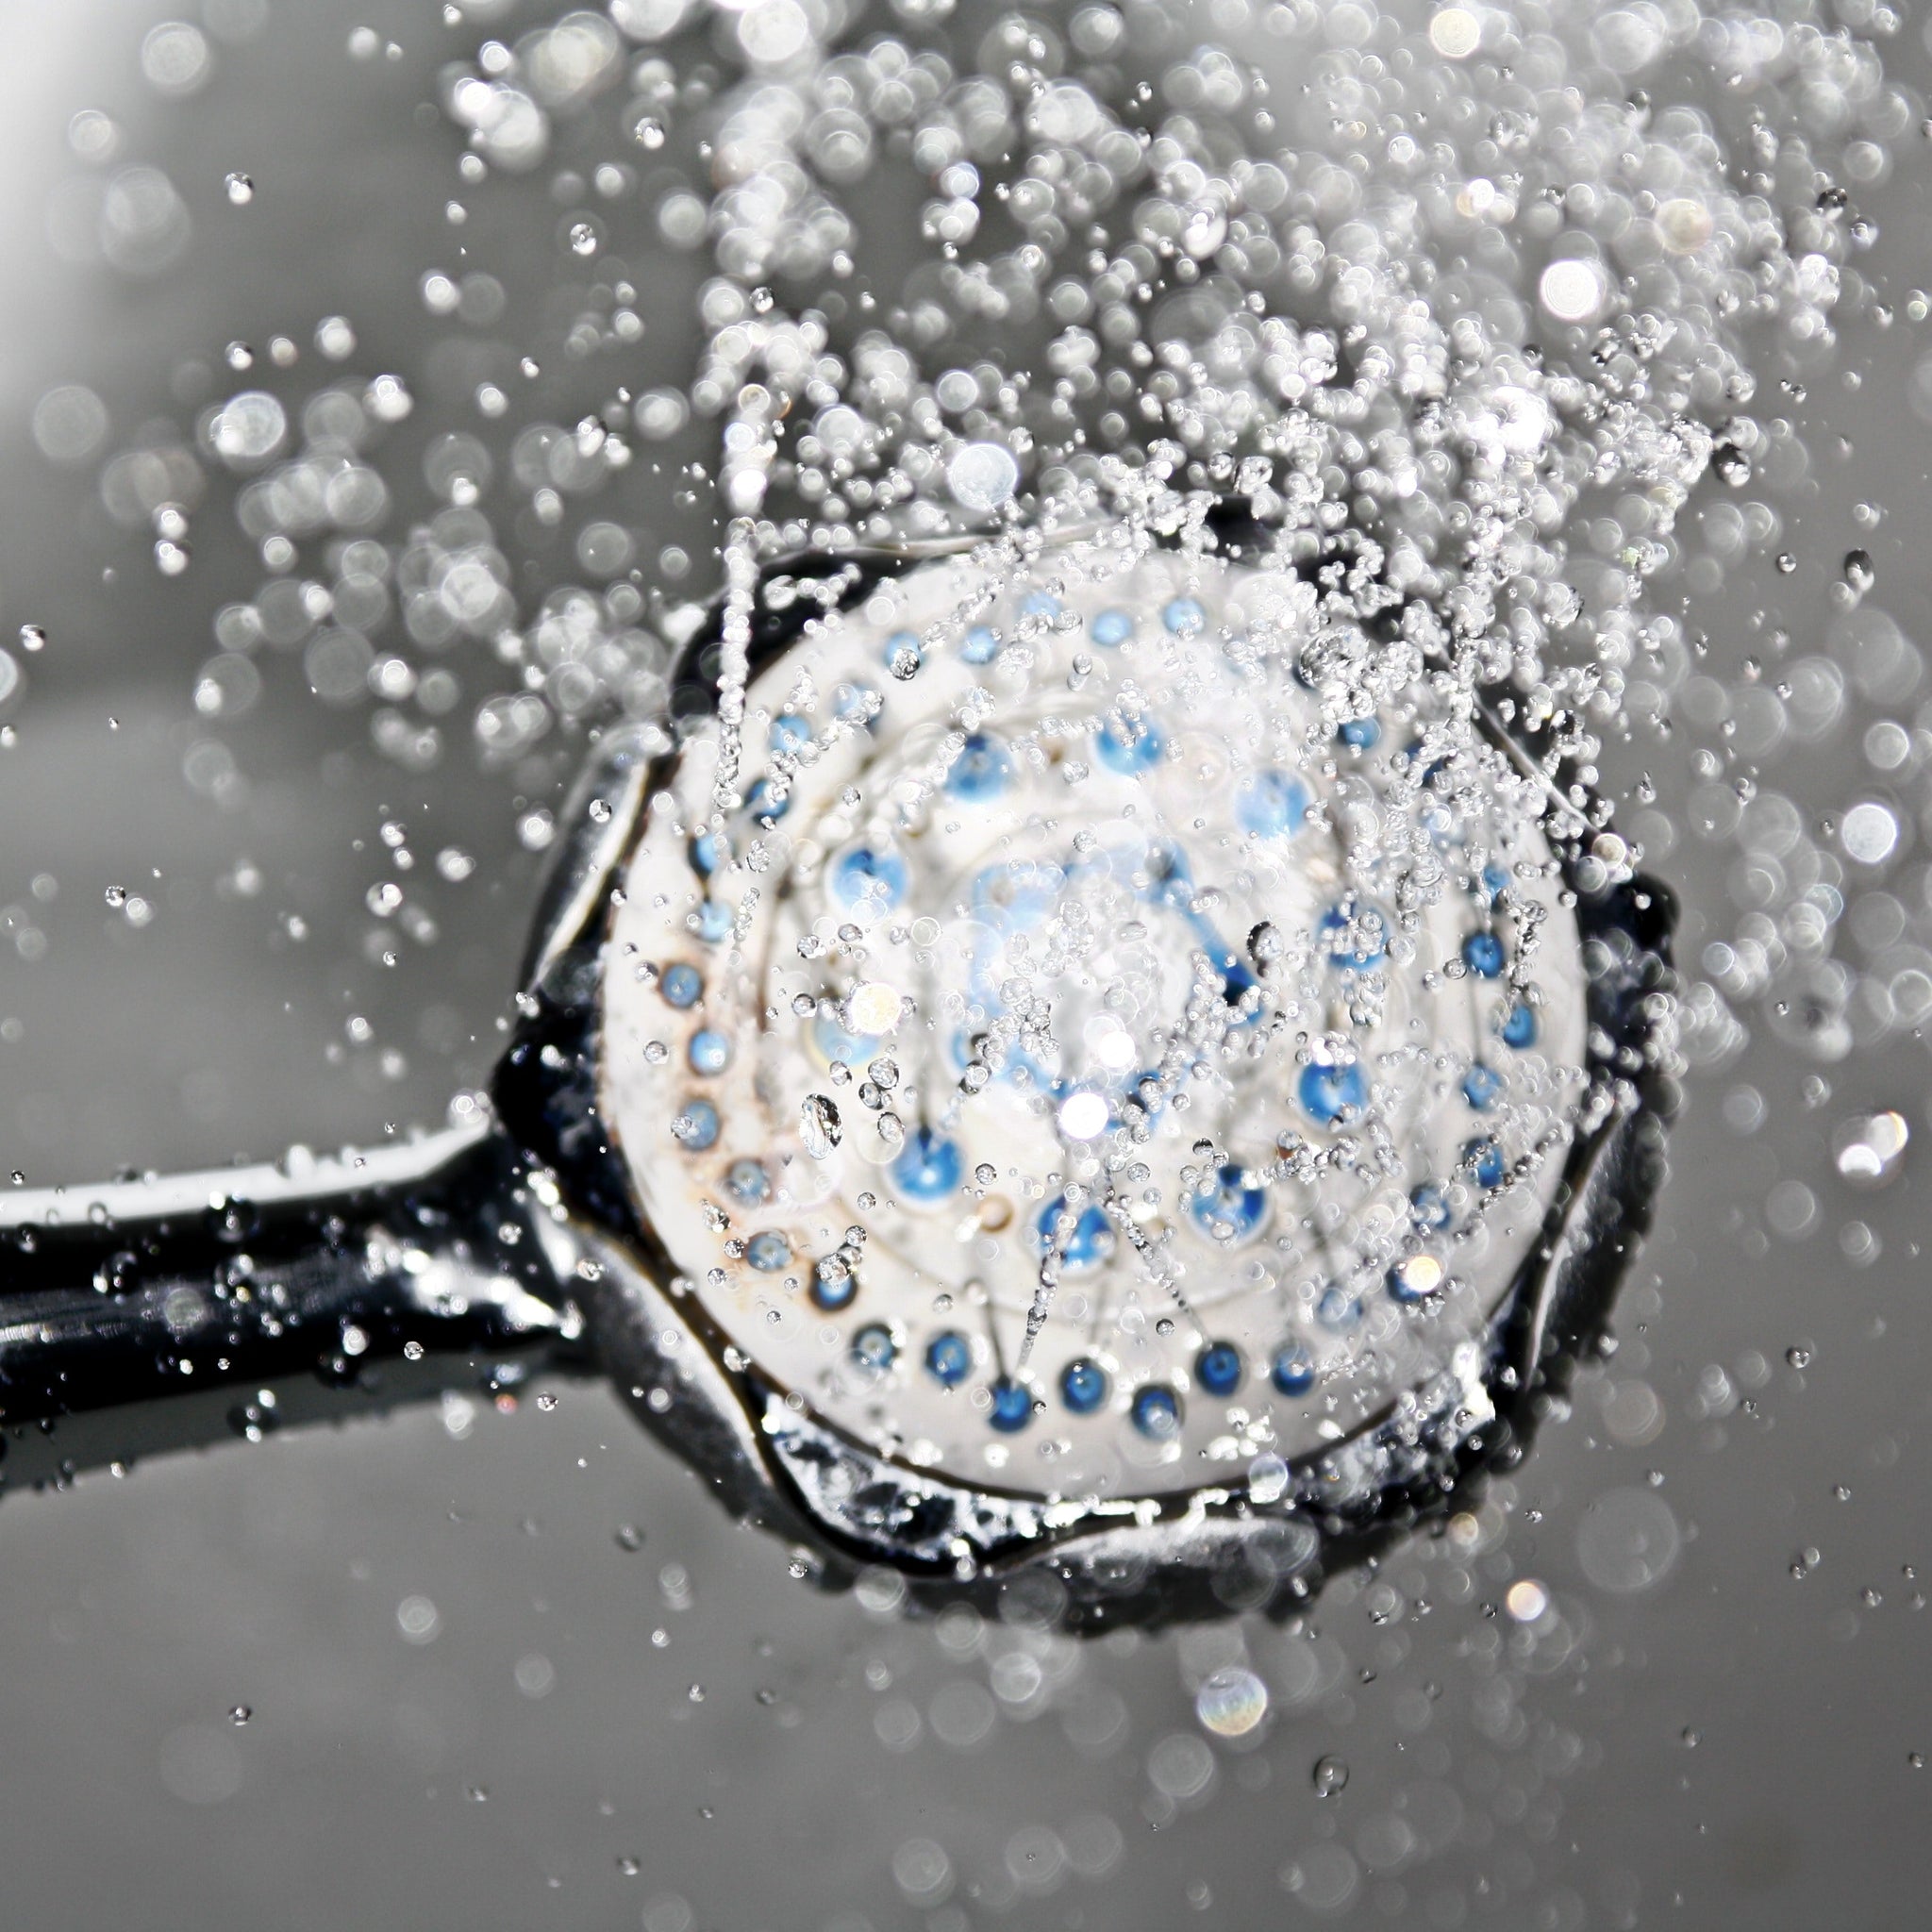 Some Things You Need To Know About High Pressure Shower Heads